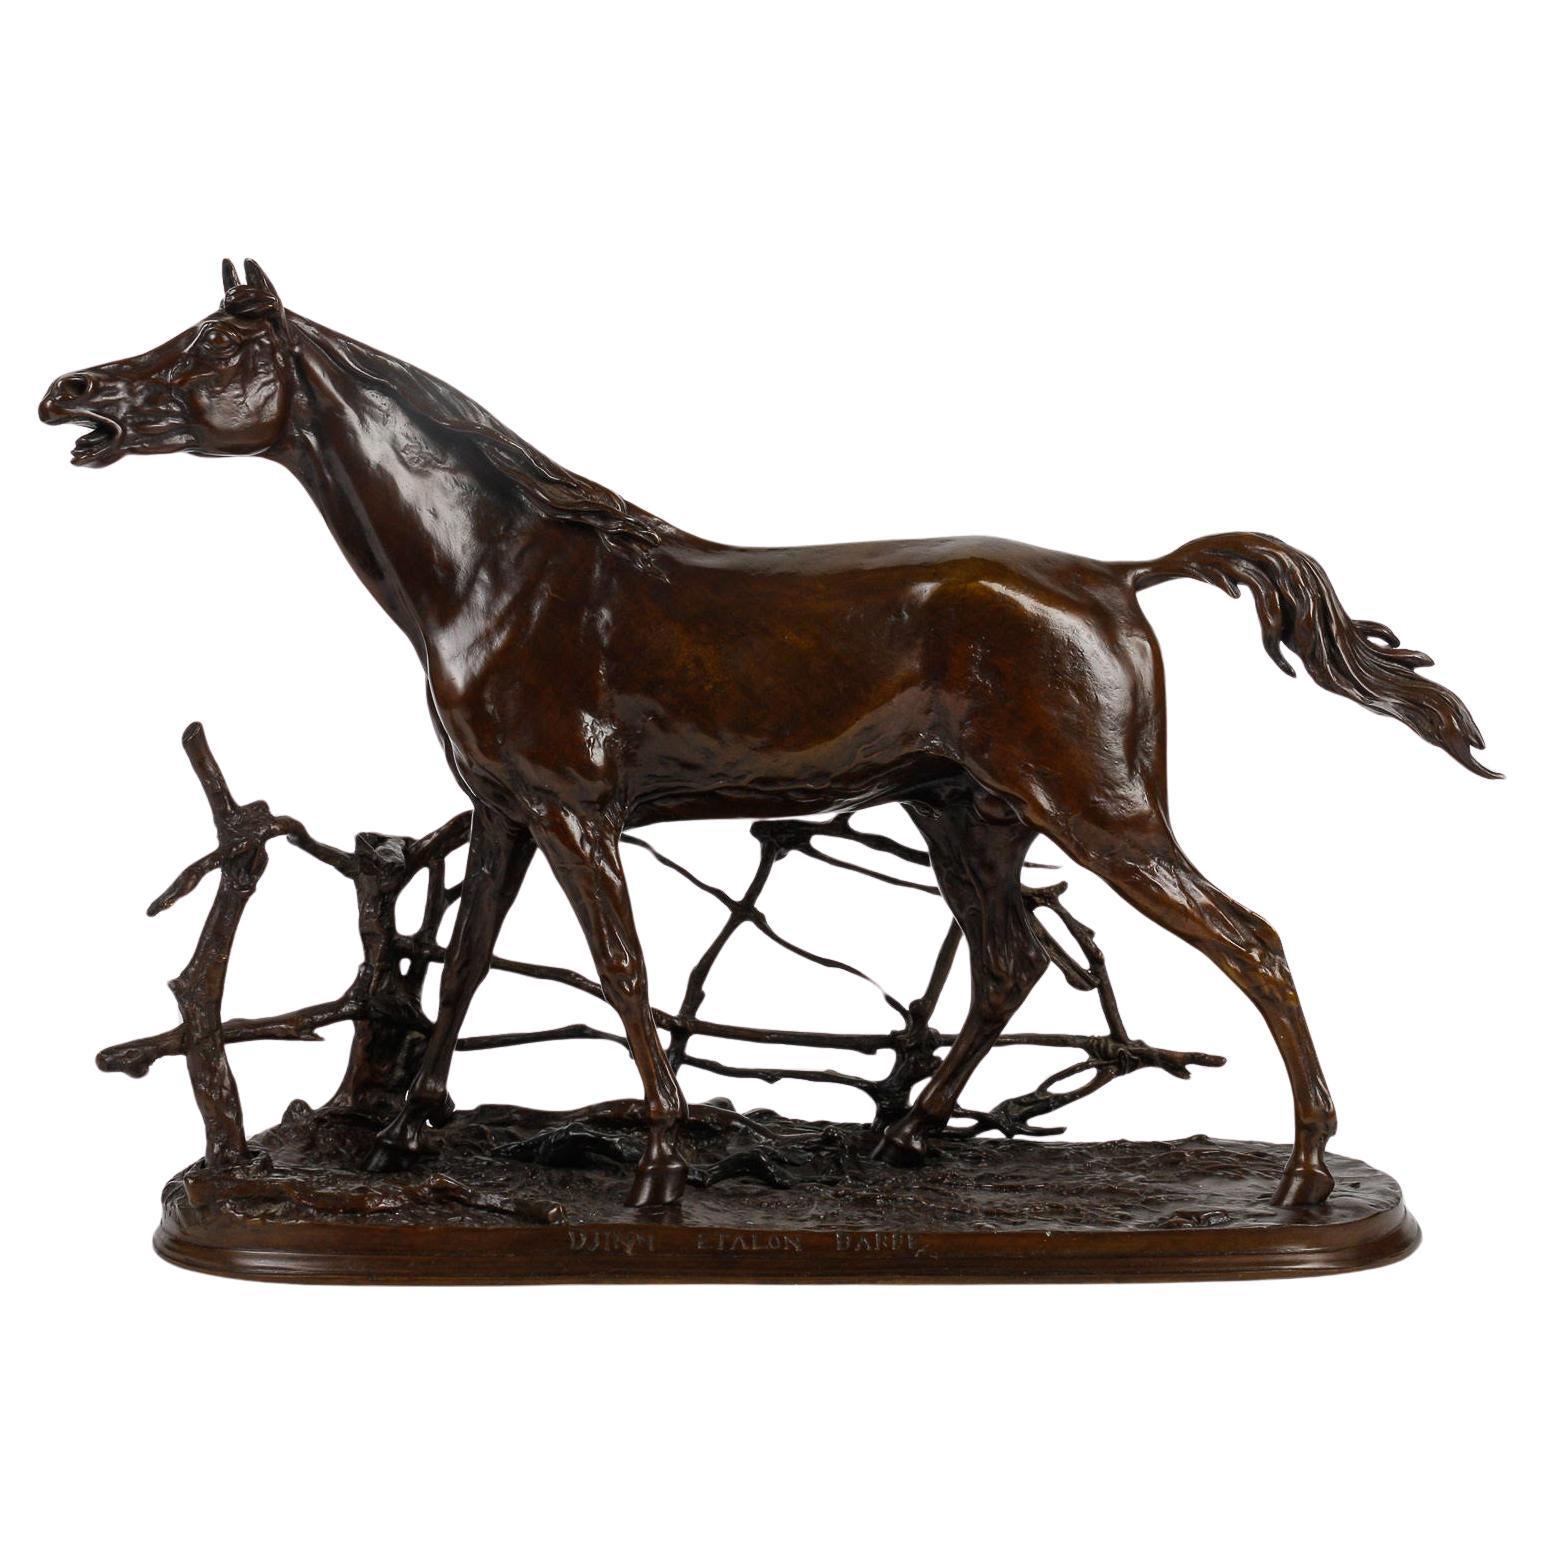 Bronze Sculpture of a Horse in its Enclosure, 20th Century.